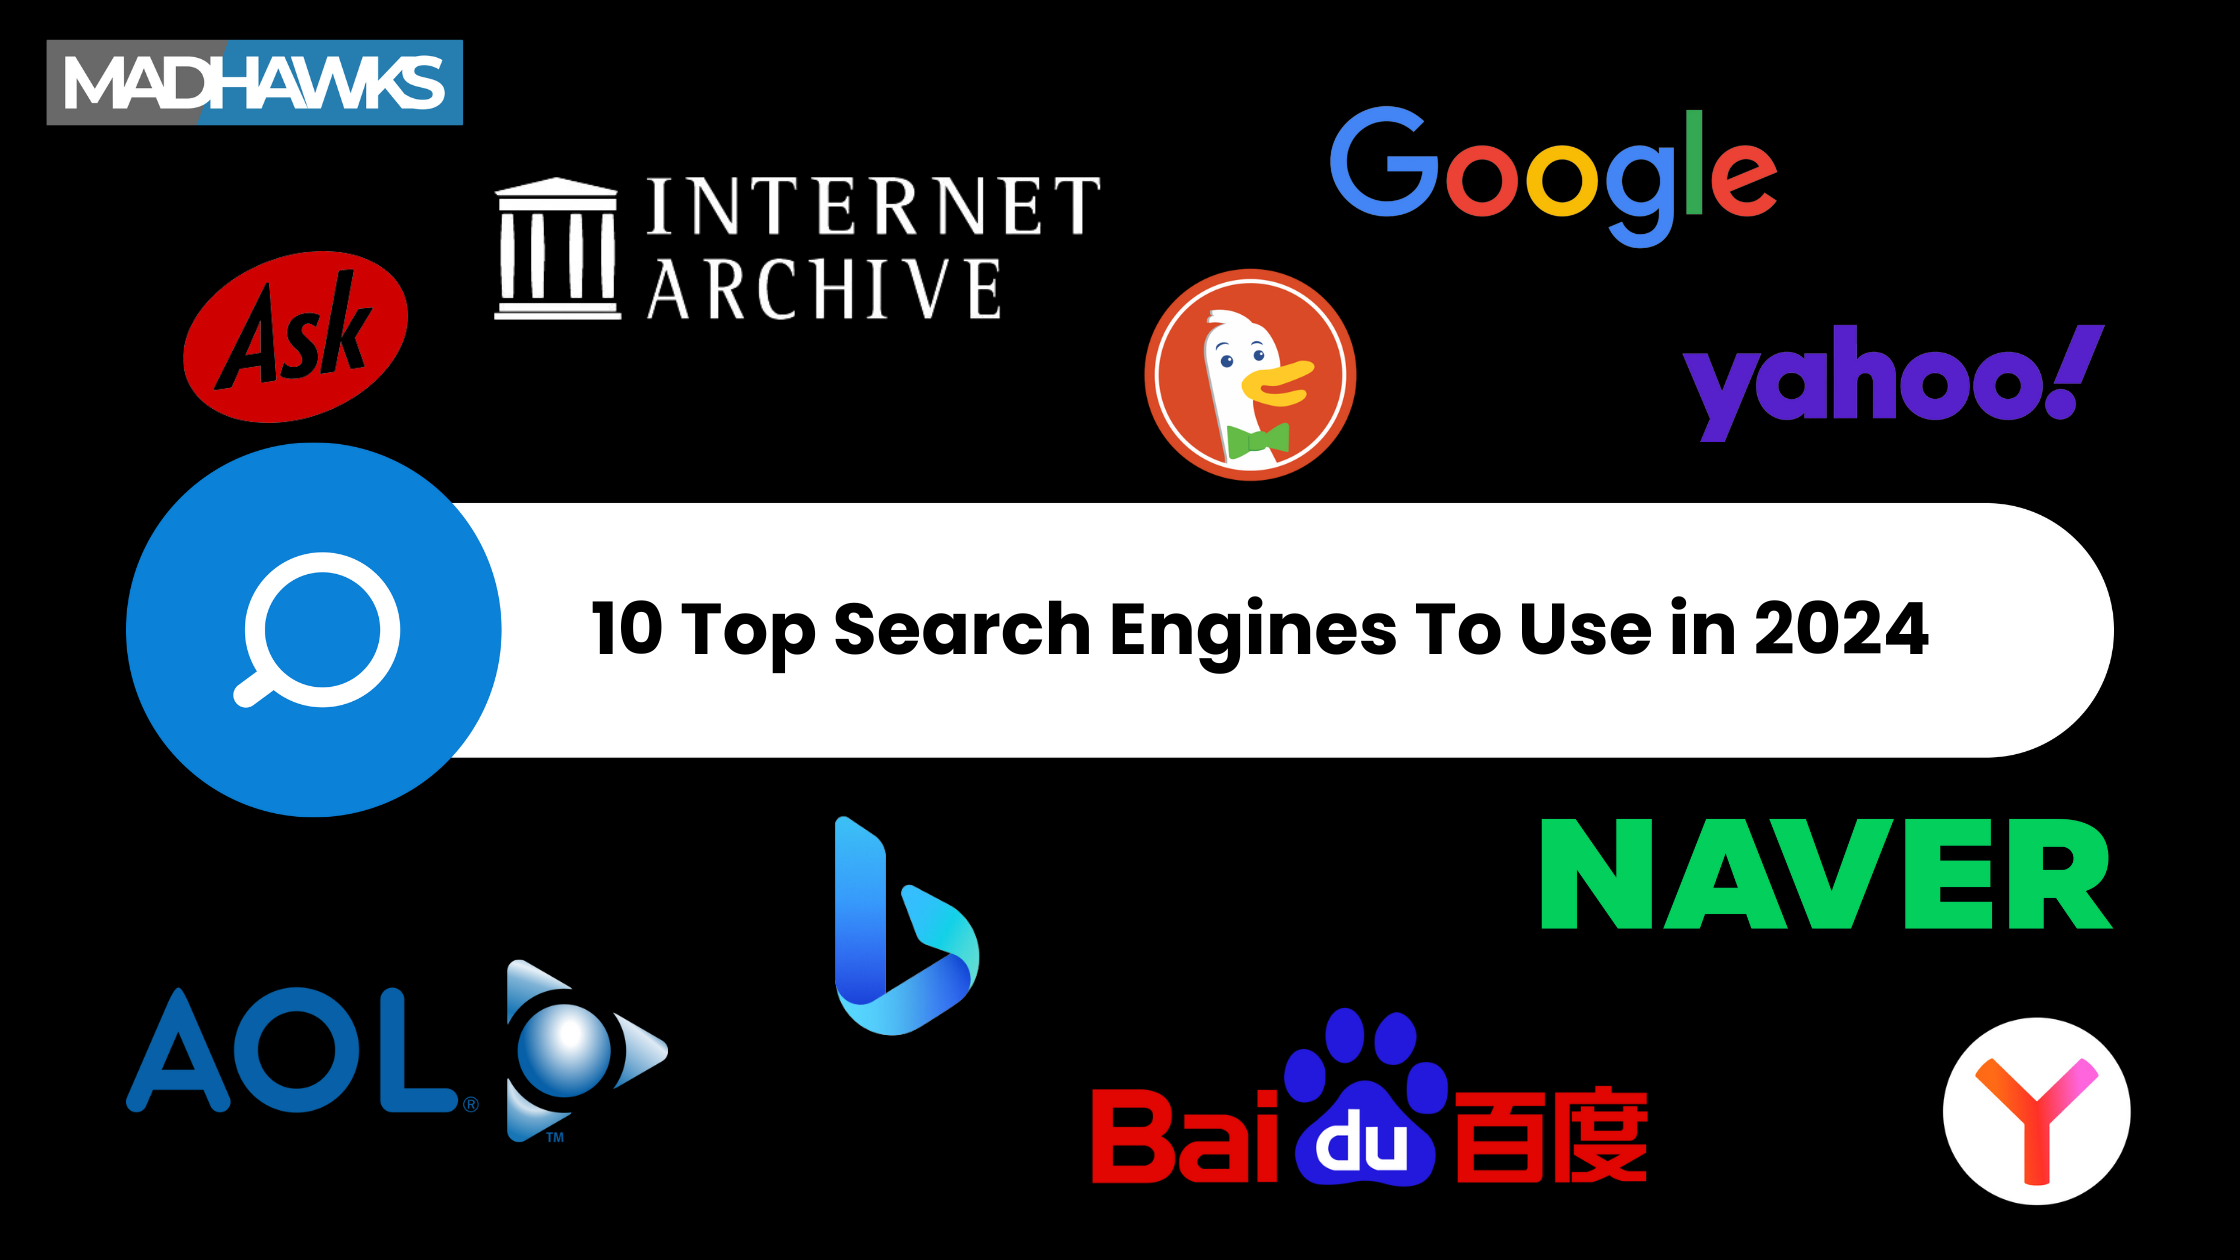 10 Top Search Engines To Use in 2024